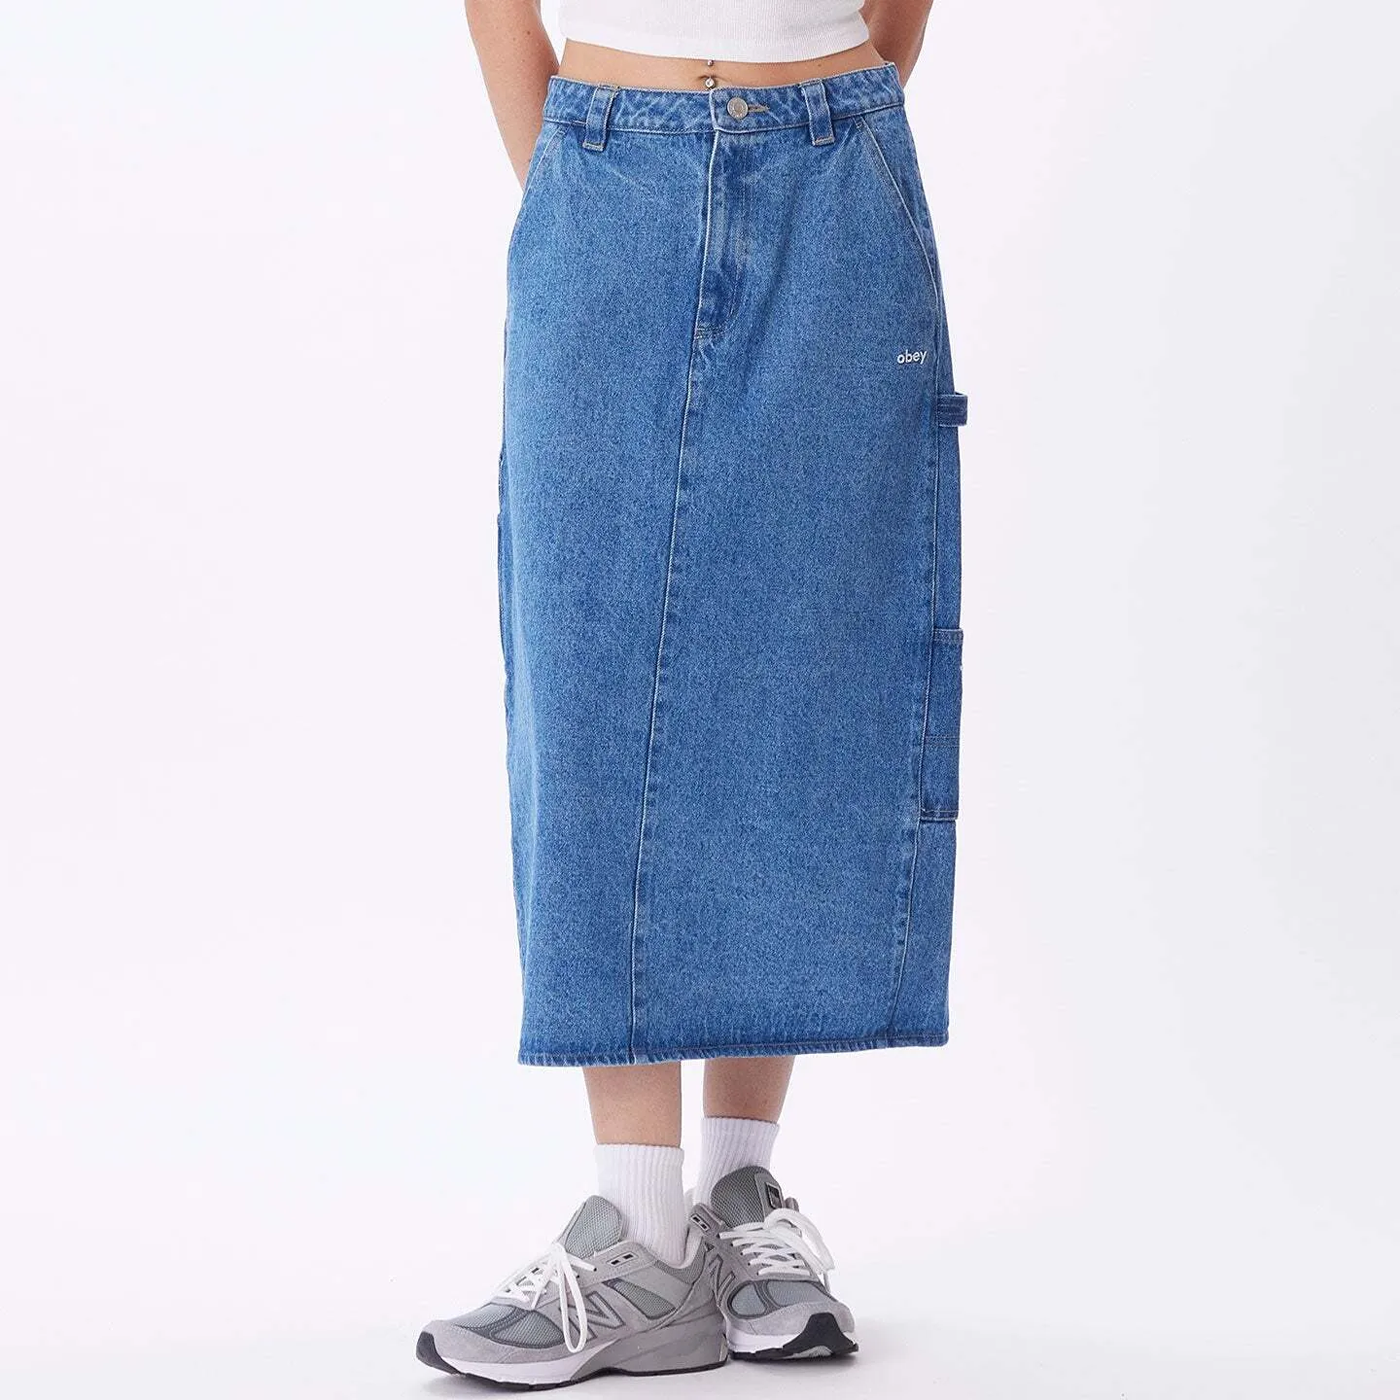 Why a denim skirt is the one item you need this spring